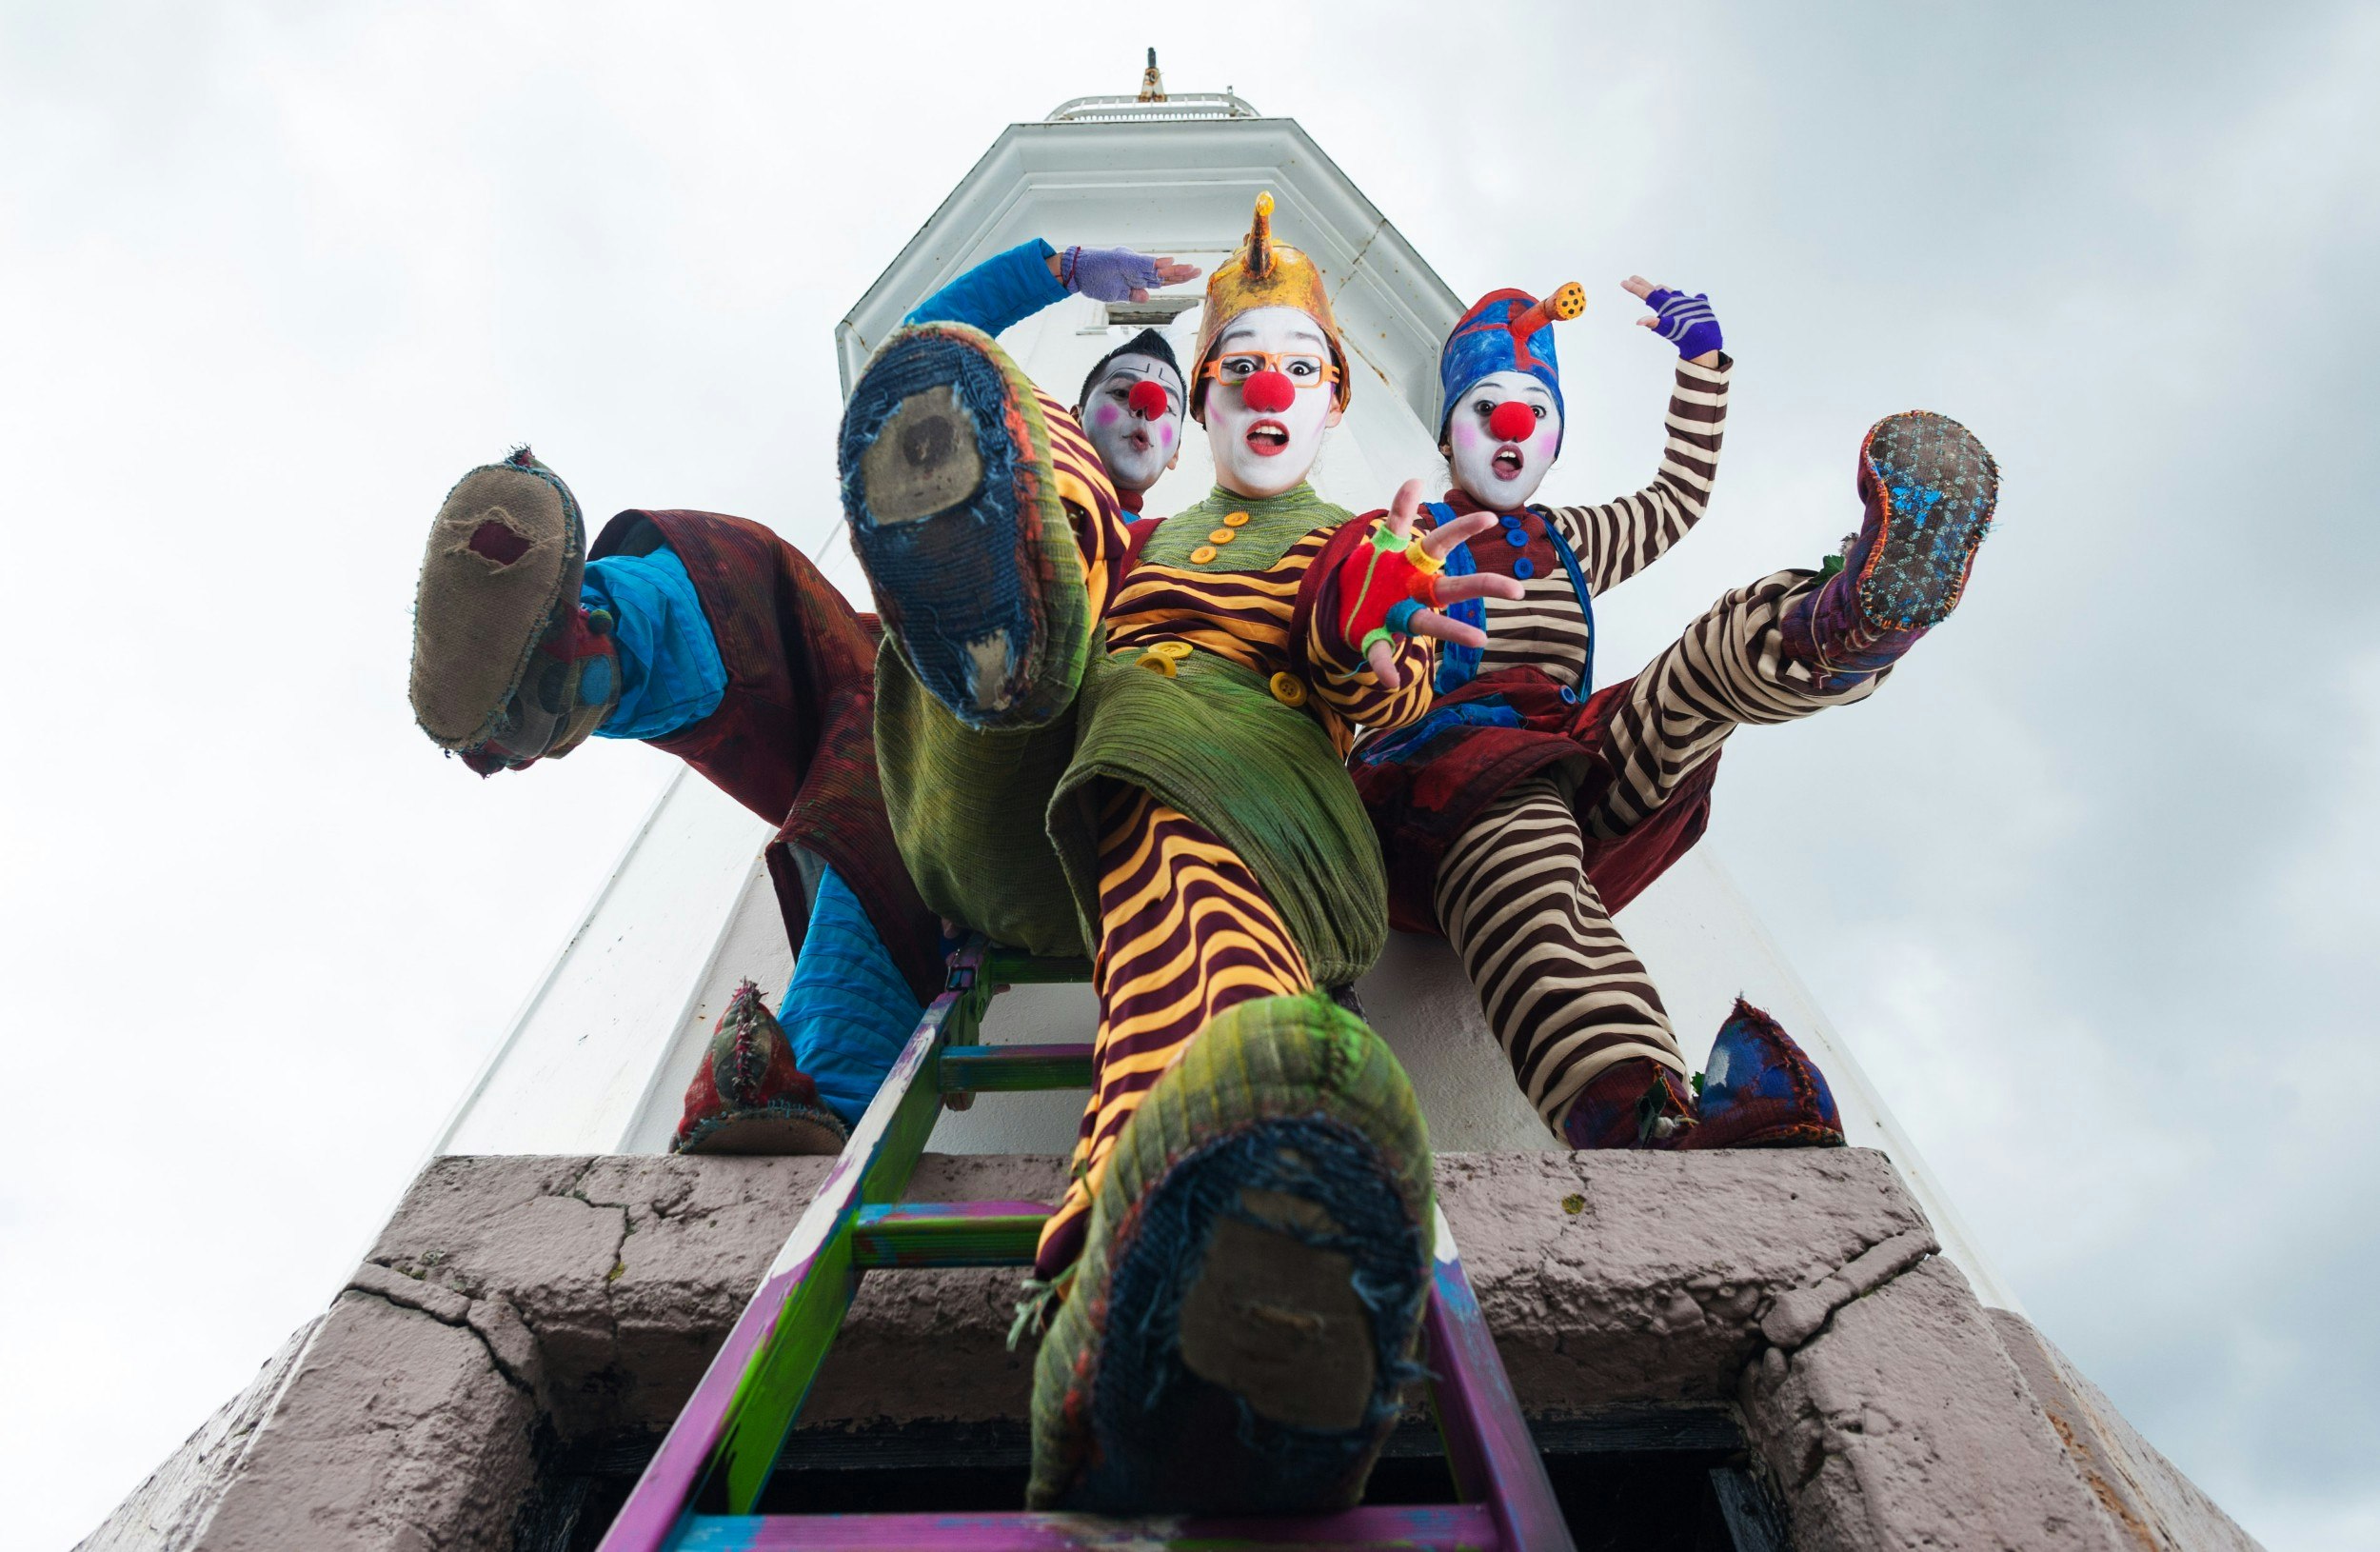 Three people dressed as clowns performing for a photocall